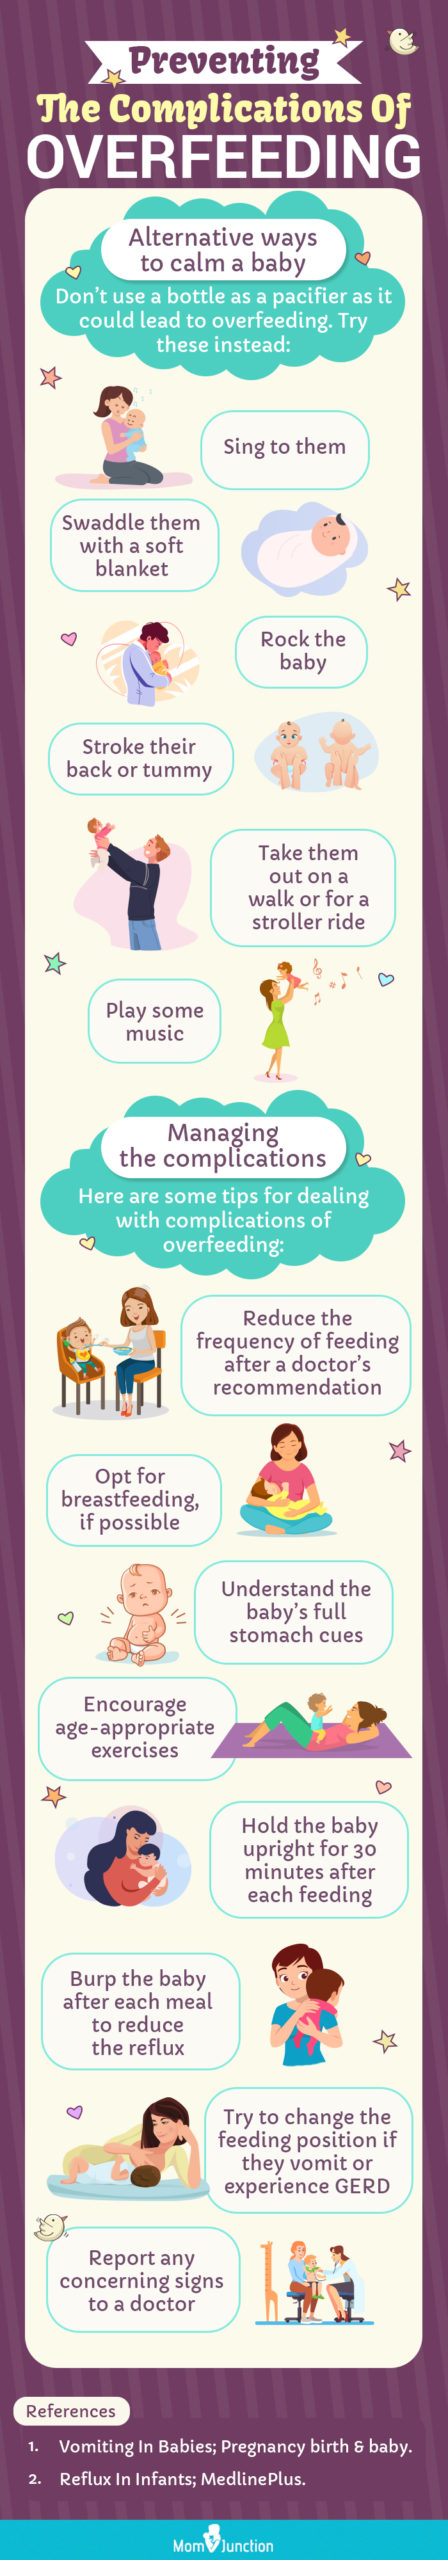 preventing the complication of overfeeding (infographic)